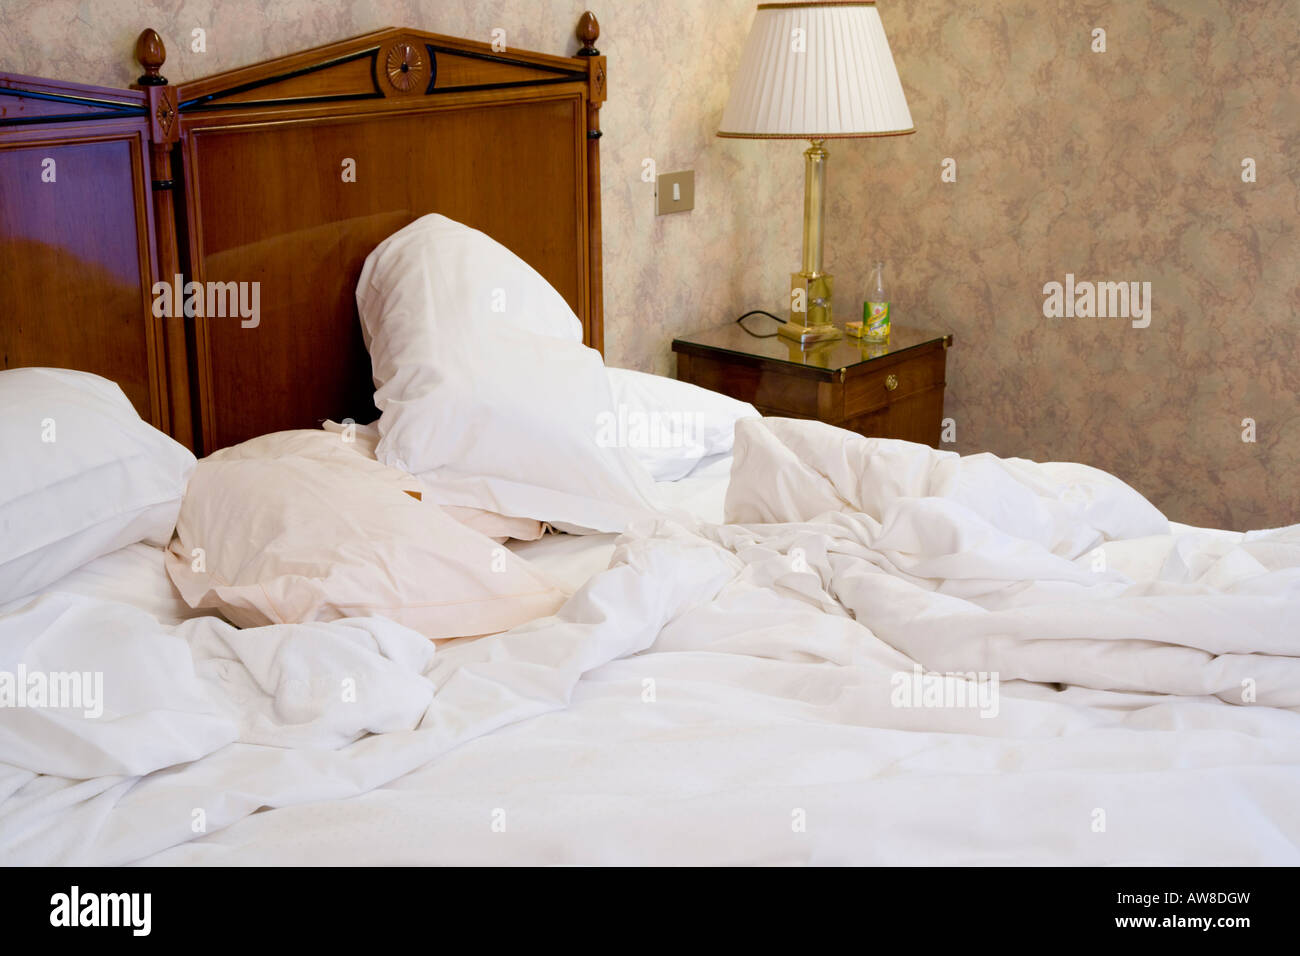 Unmade bed hotel bedroom sheets ruffled mess messy pillow untidy Stock Photo